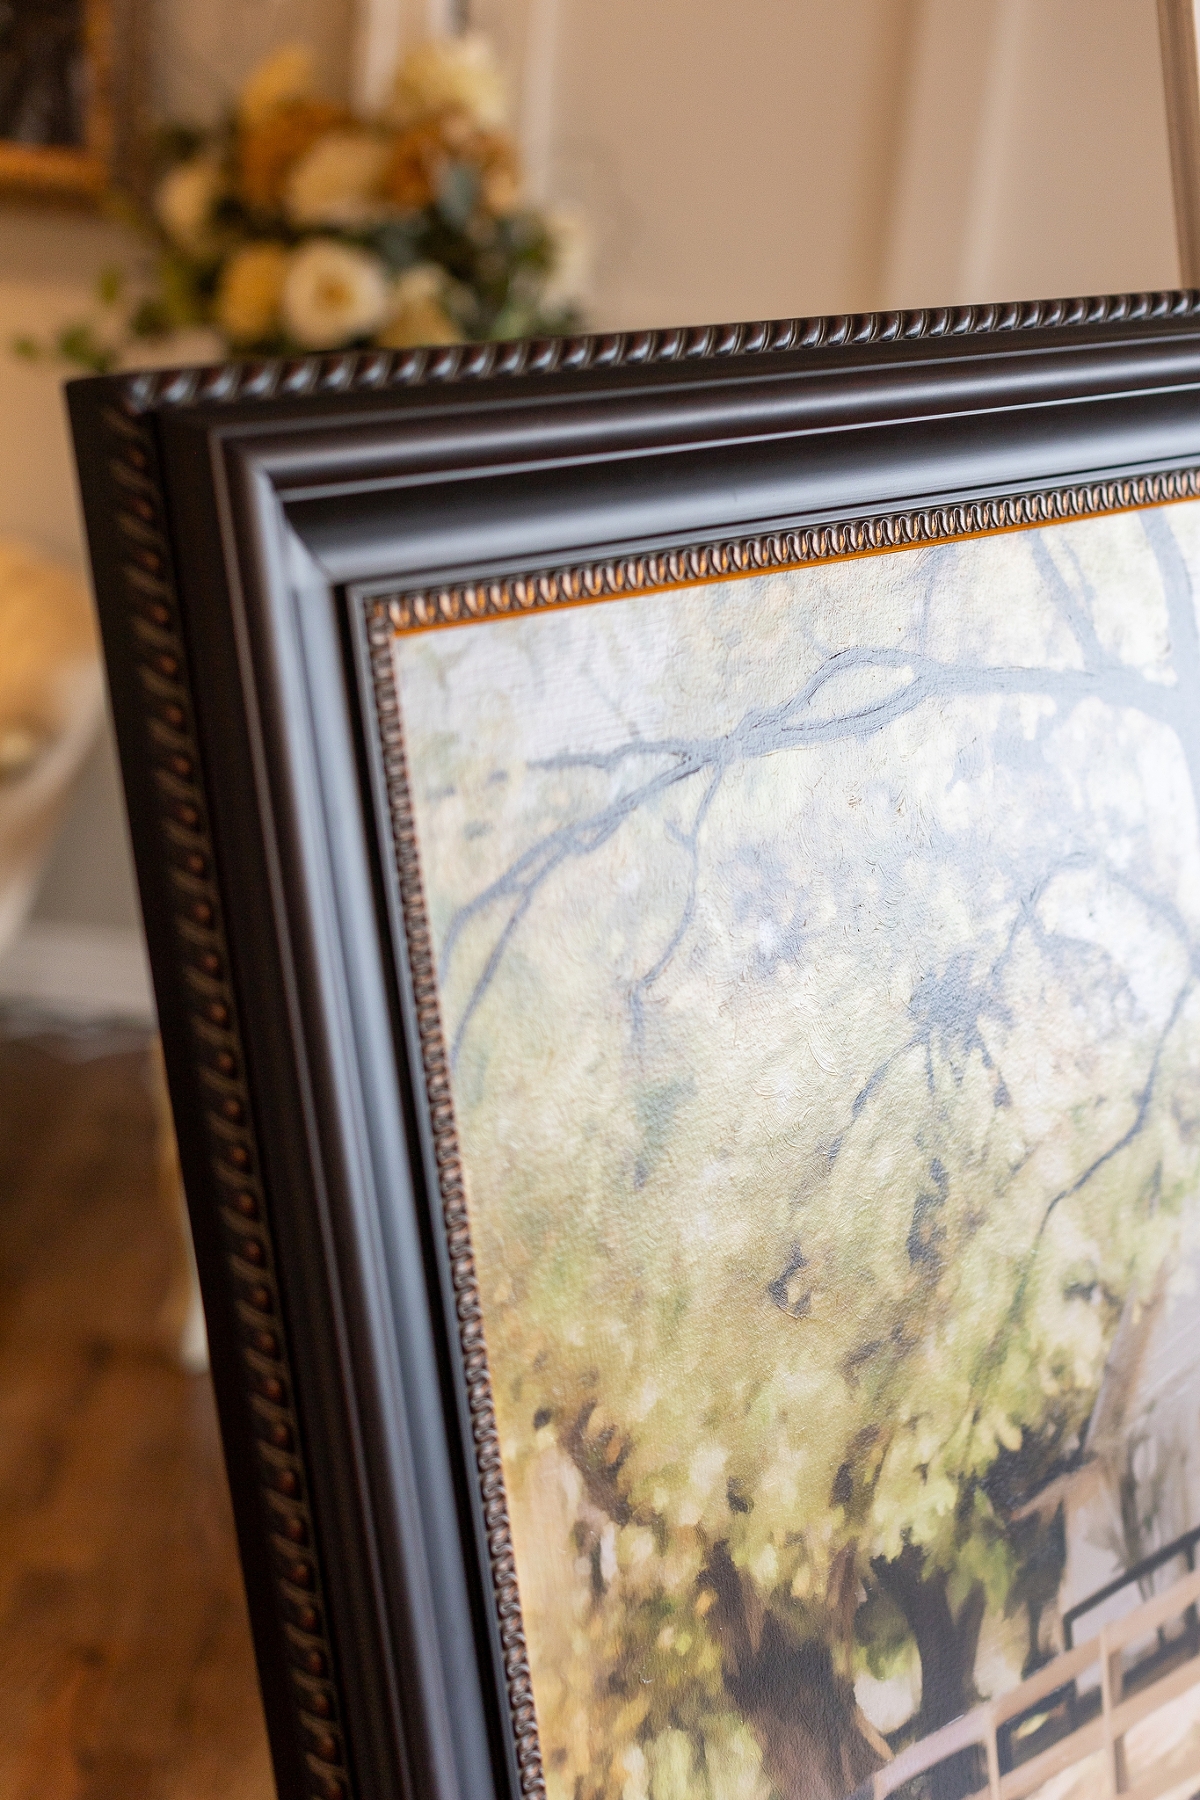 A close-up view of the corner of an ornate picture frame displaying a painting with visible tree branches and foliage.